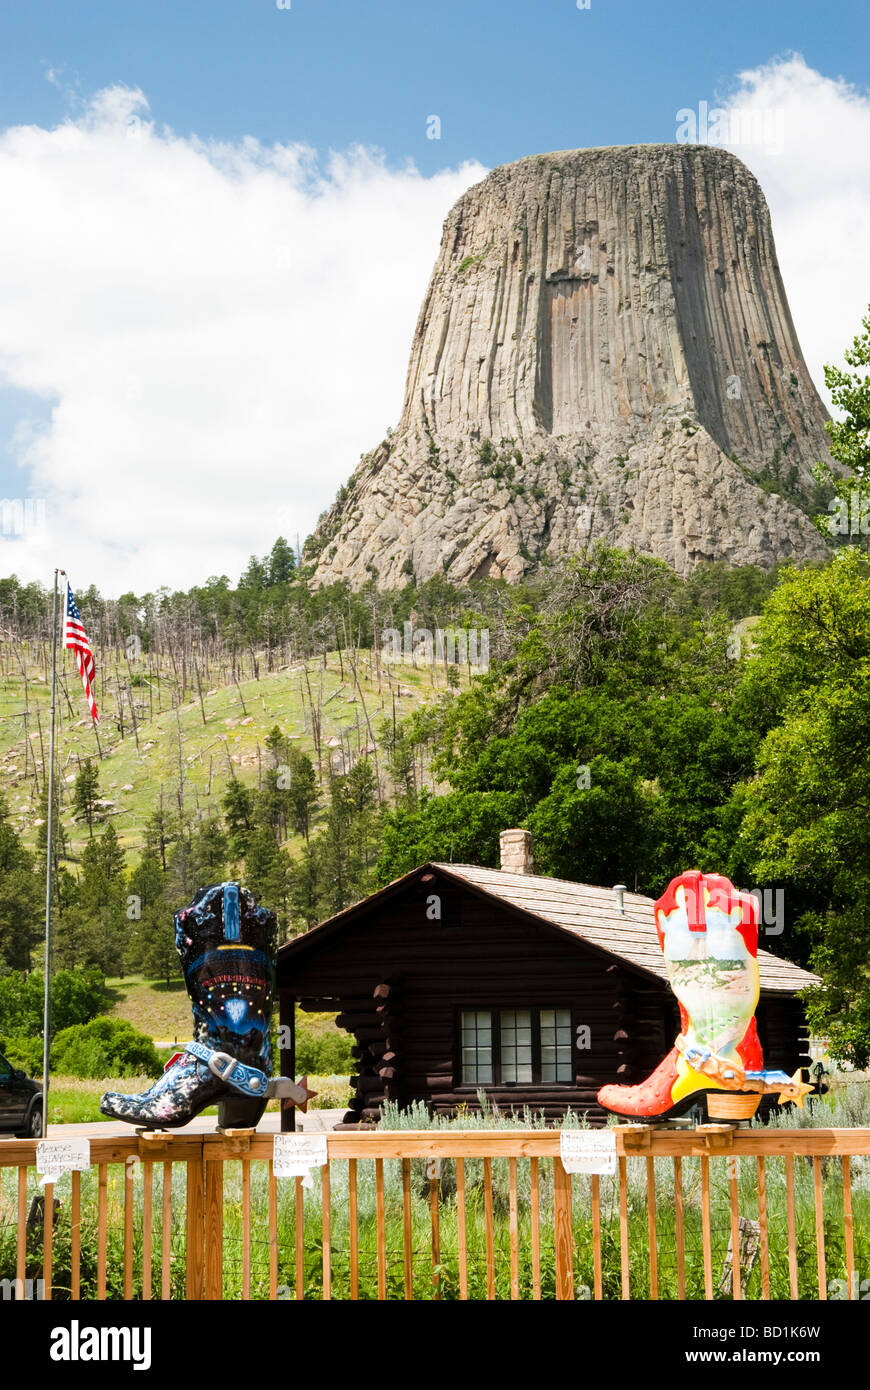 Blick vom Eingang am Devils Tower National Monument in Wyoming Stockfoto